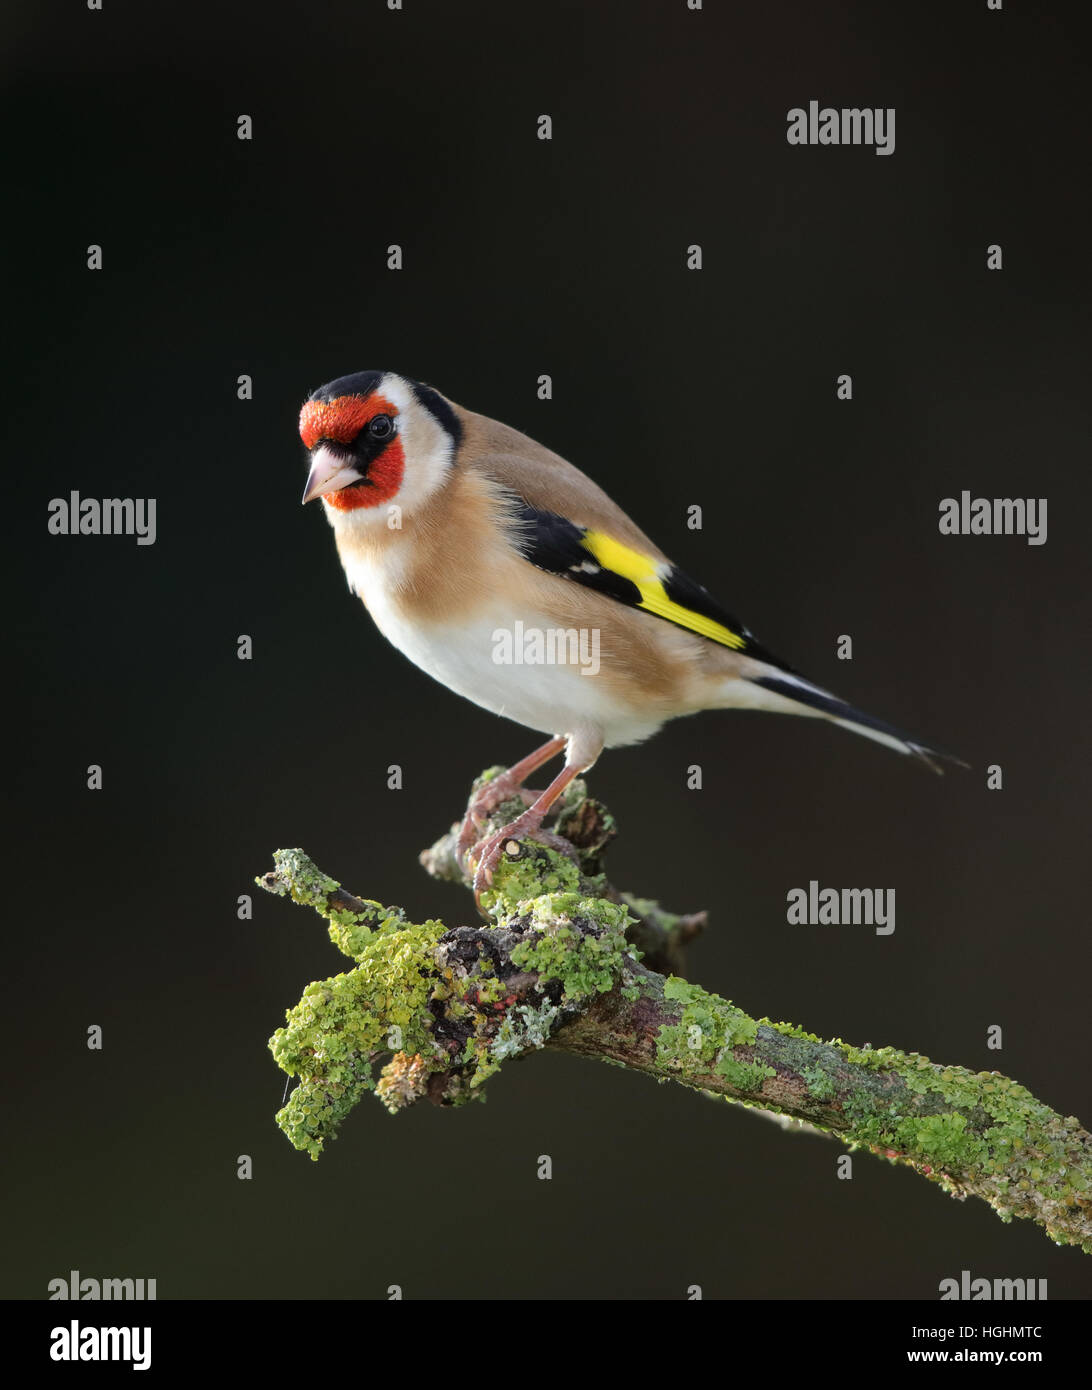 Goldfinch, Carduelis carduelis, in a garden in winter Stock Photo